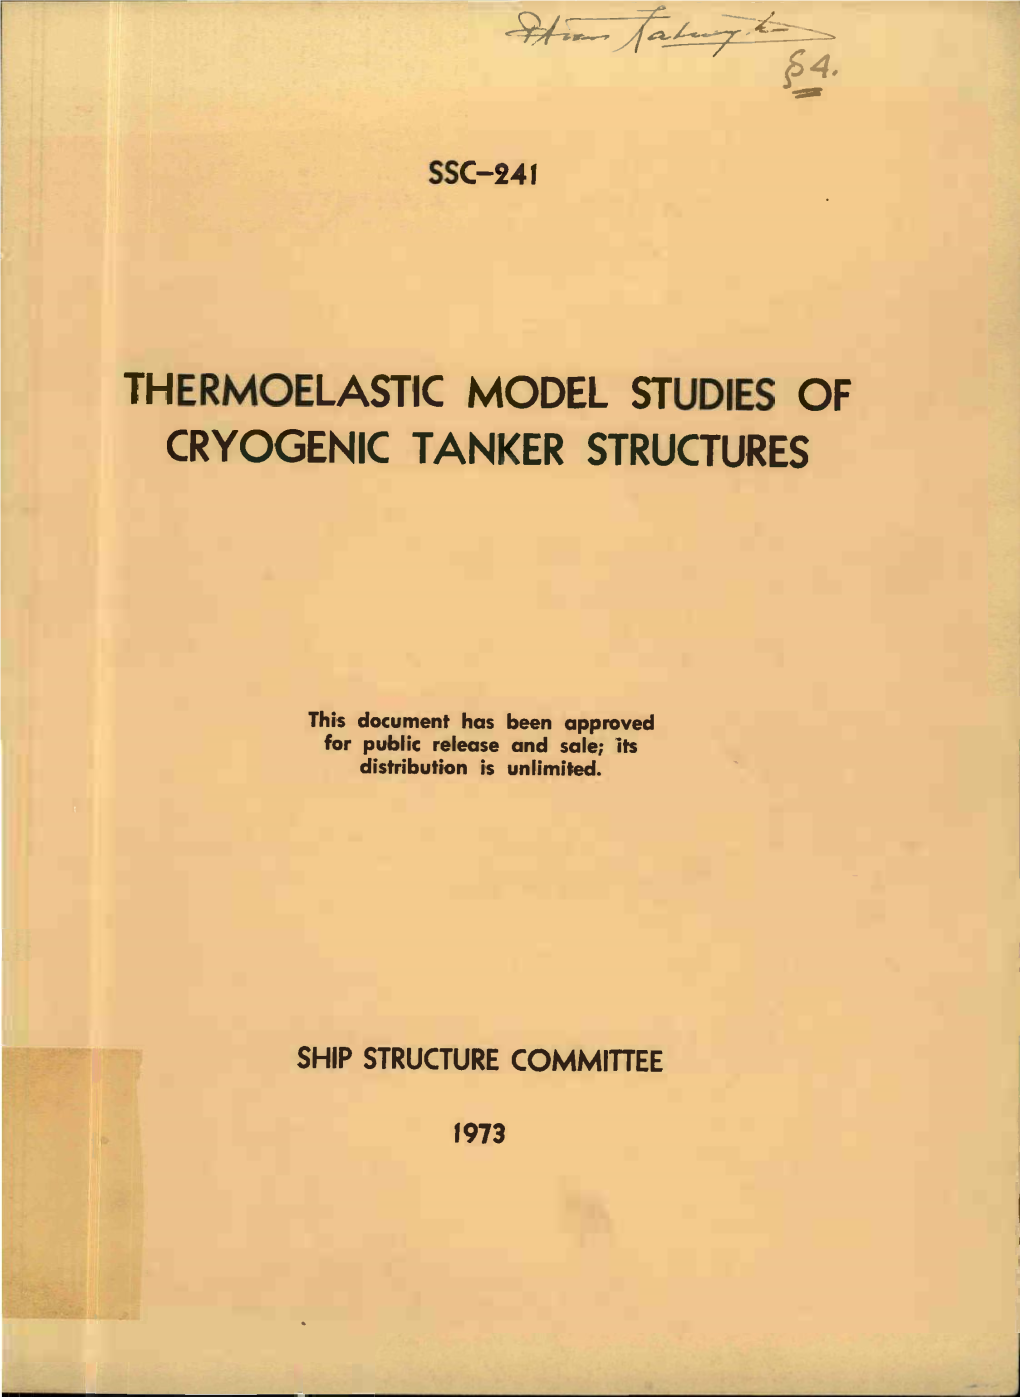 Thermoelastic Model Studies of Cryogenic Tanker Structures